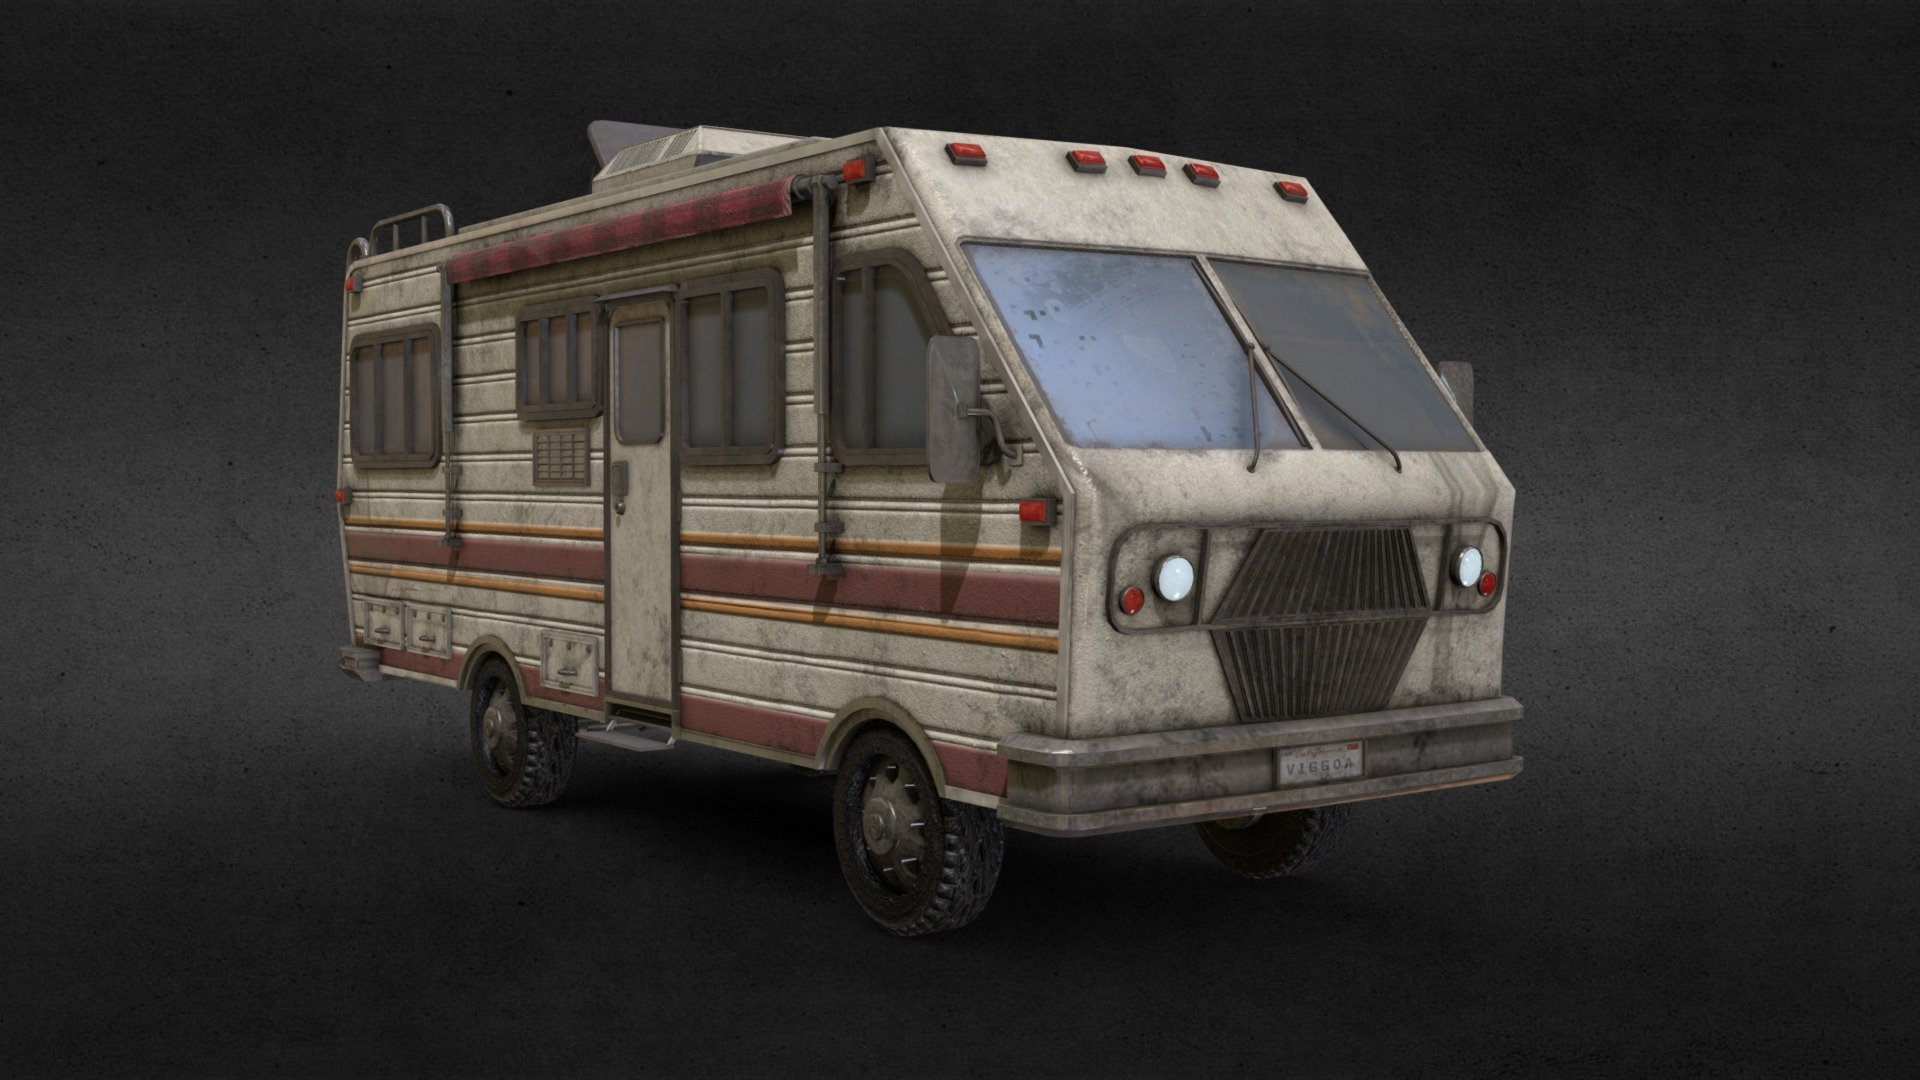 I made this RV for a scene with an old house on the outskirts of town. The model was made in Blender and textured in Substance Painter 3d model